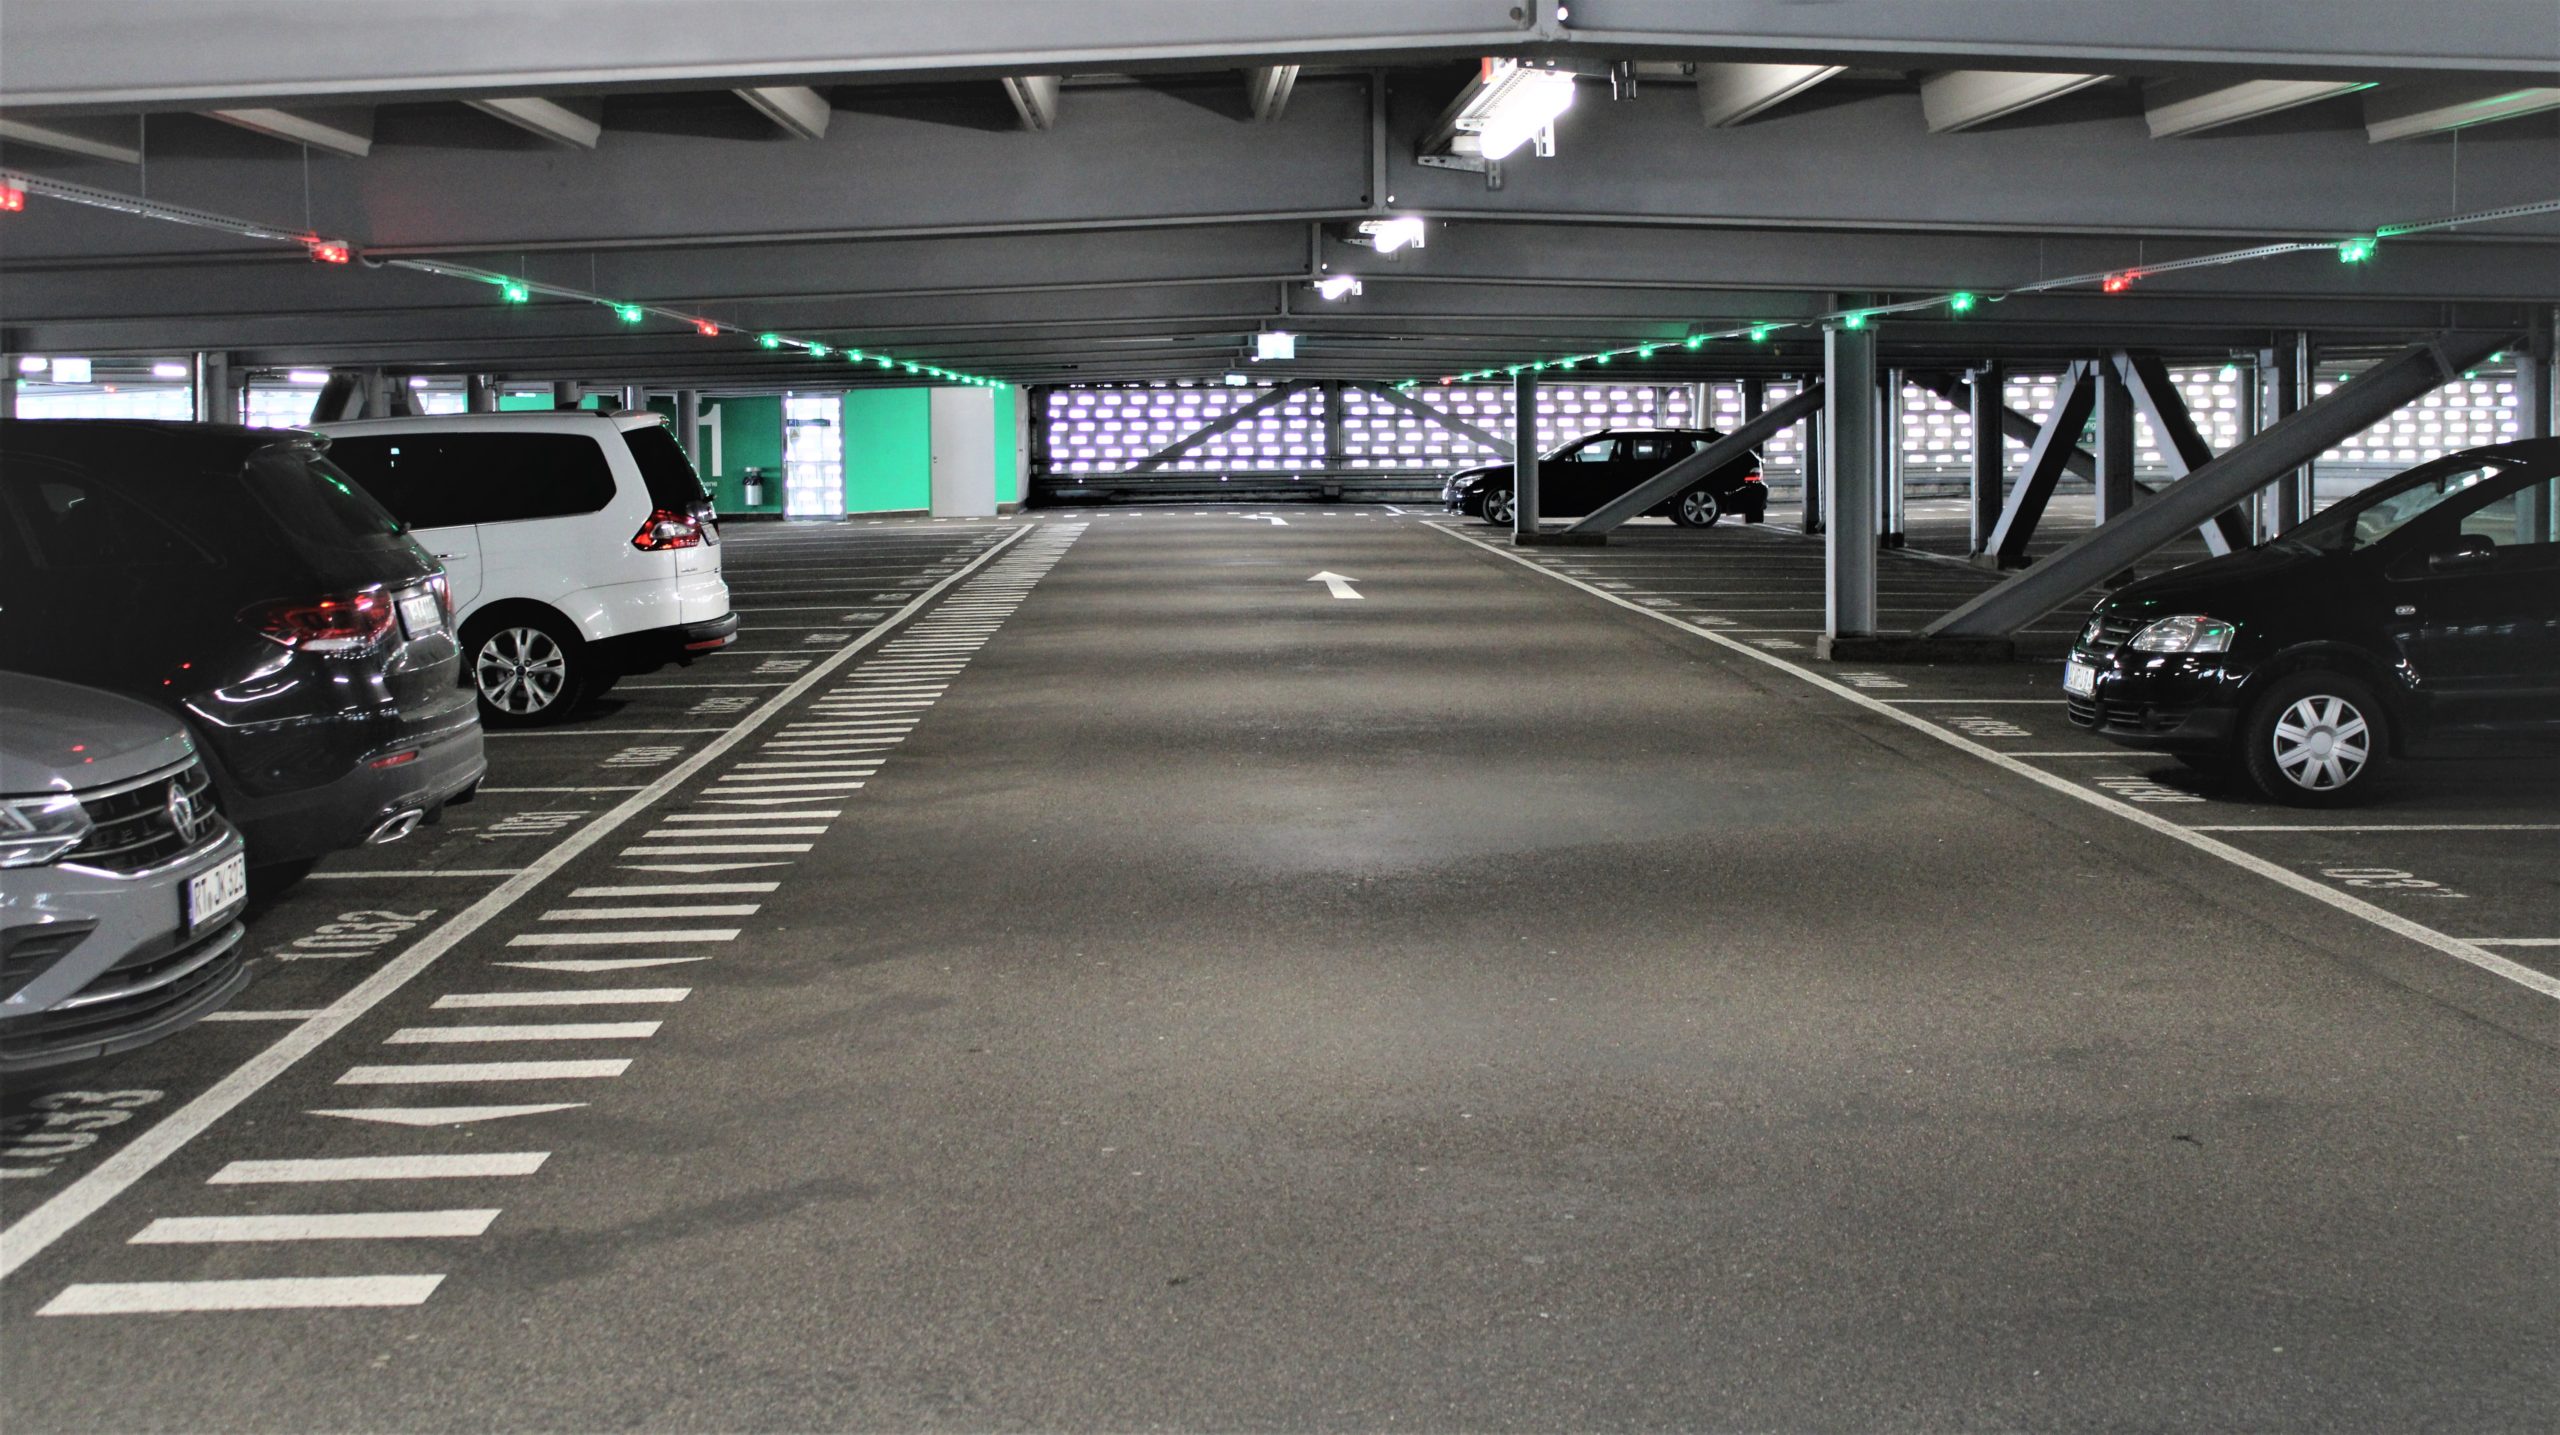 Ultrasonic sensors and LED matrix displays are employed to control the parking traffic in the newly built parking garage of an international food company in London.